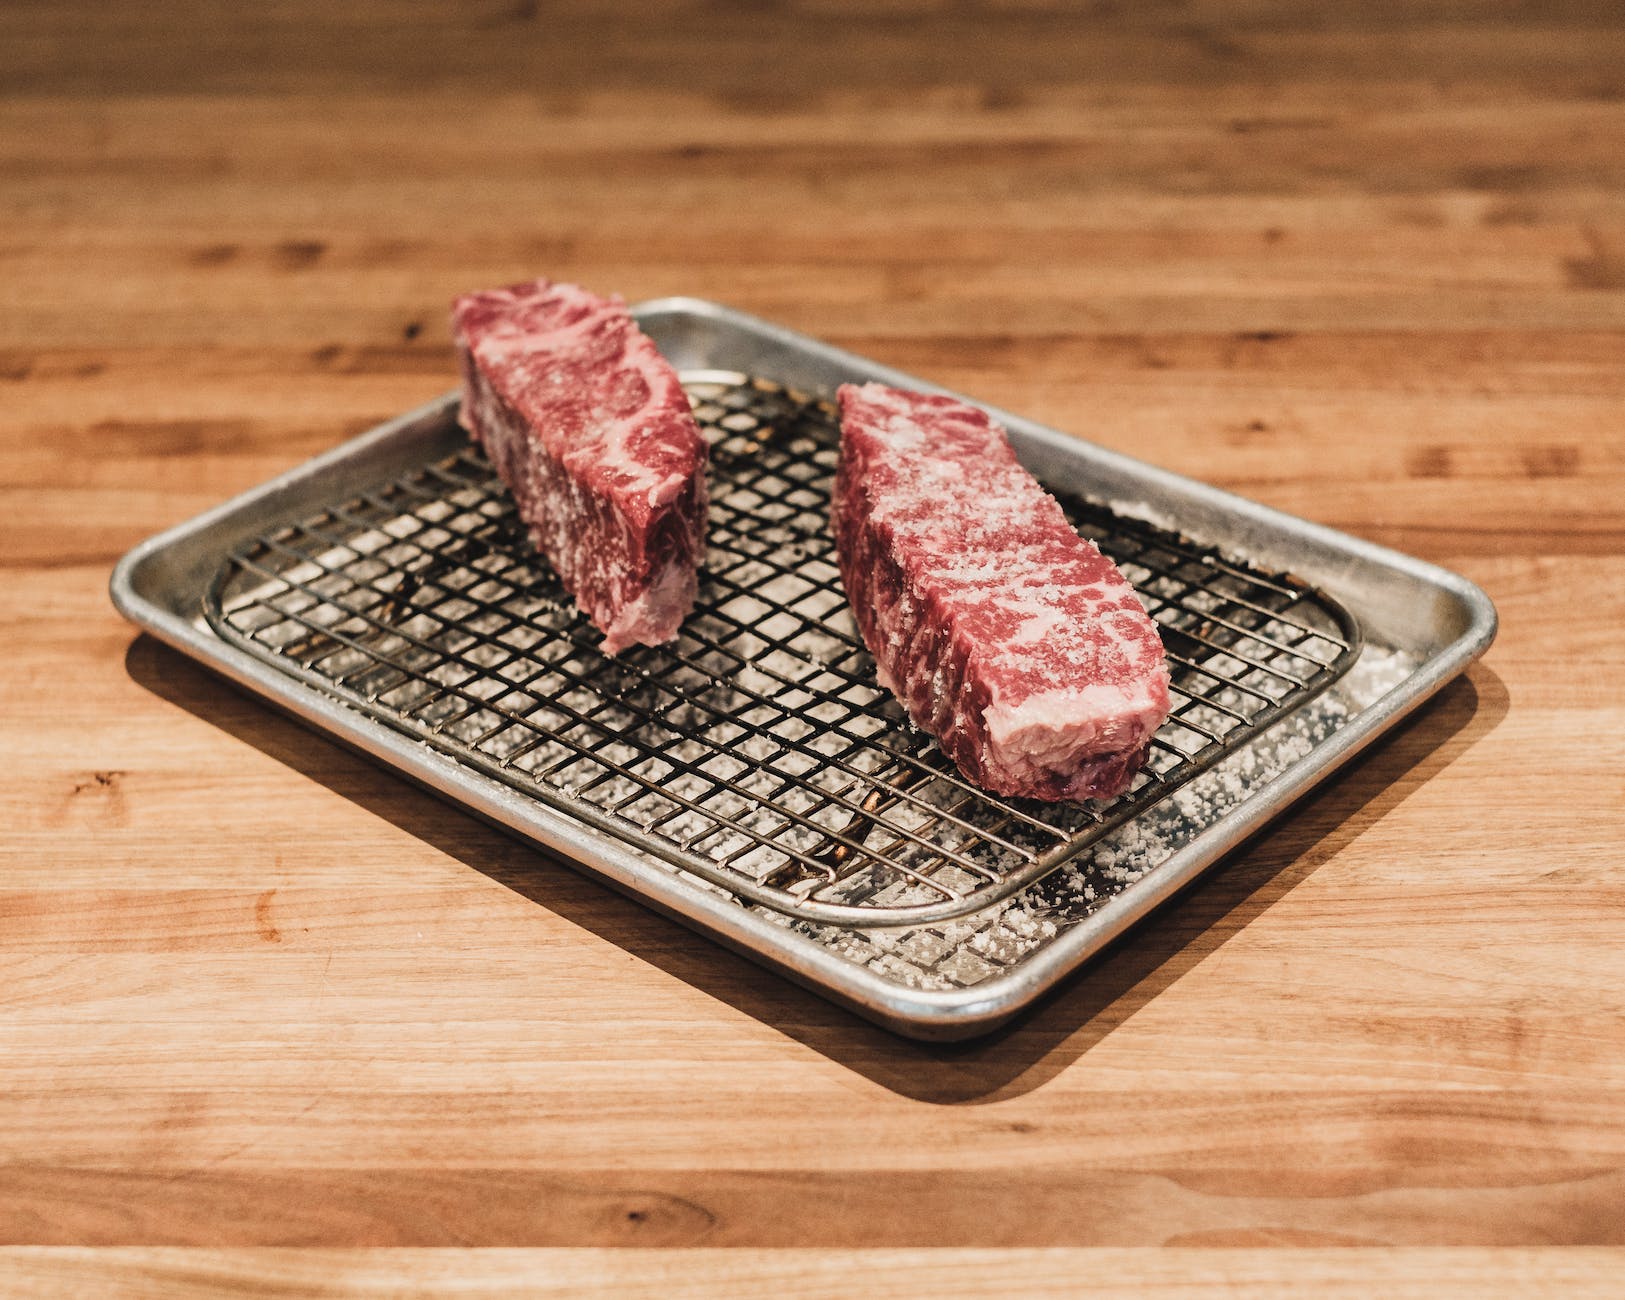 How to Cook Wagyu Ground Beef - Guide to Perfectly Preparing this Premium Meat